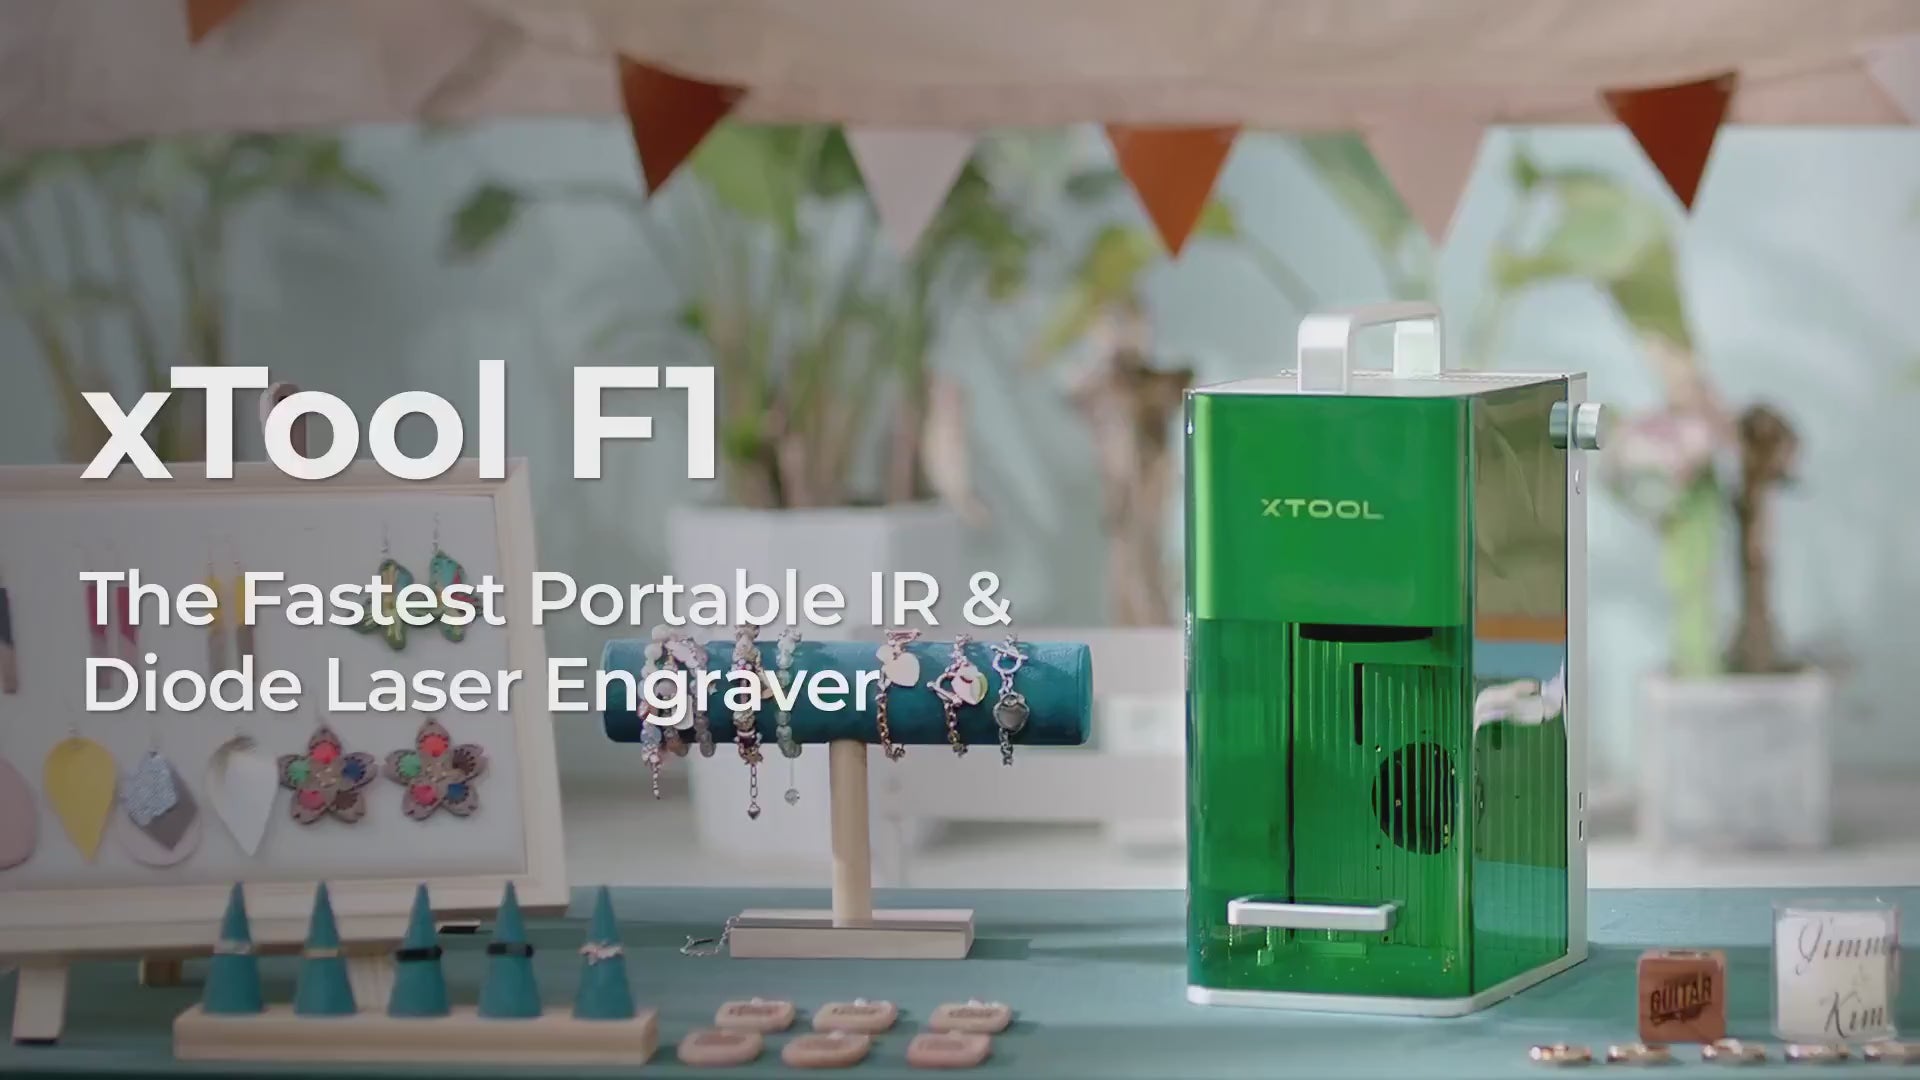 xTool F1 - Fastest Portable Laser Engraver with  IR + Diode Laser